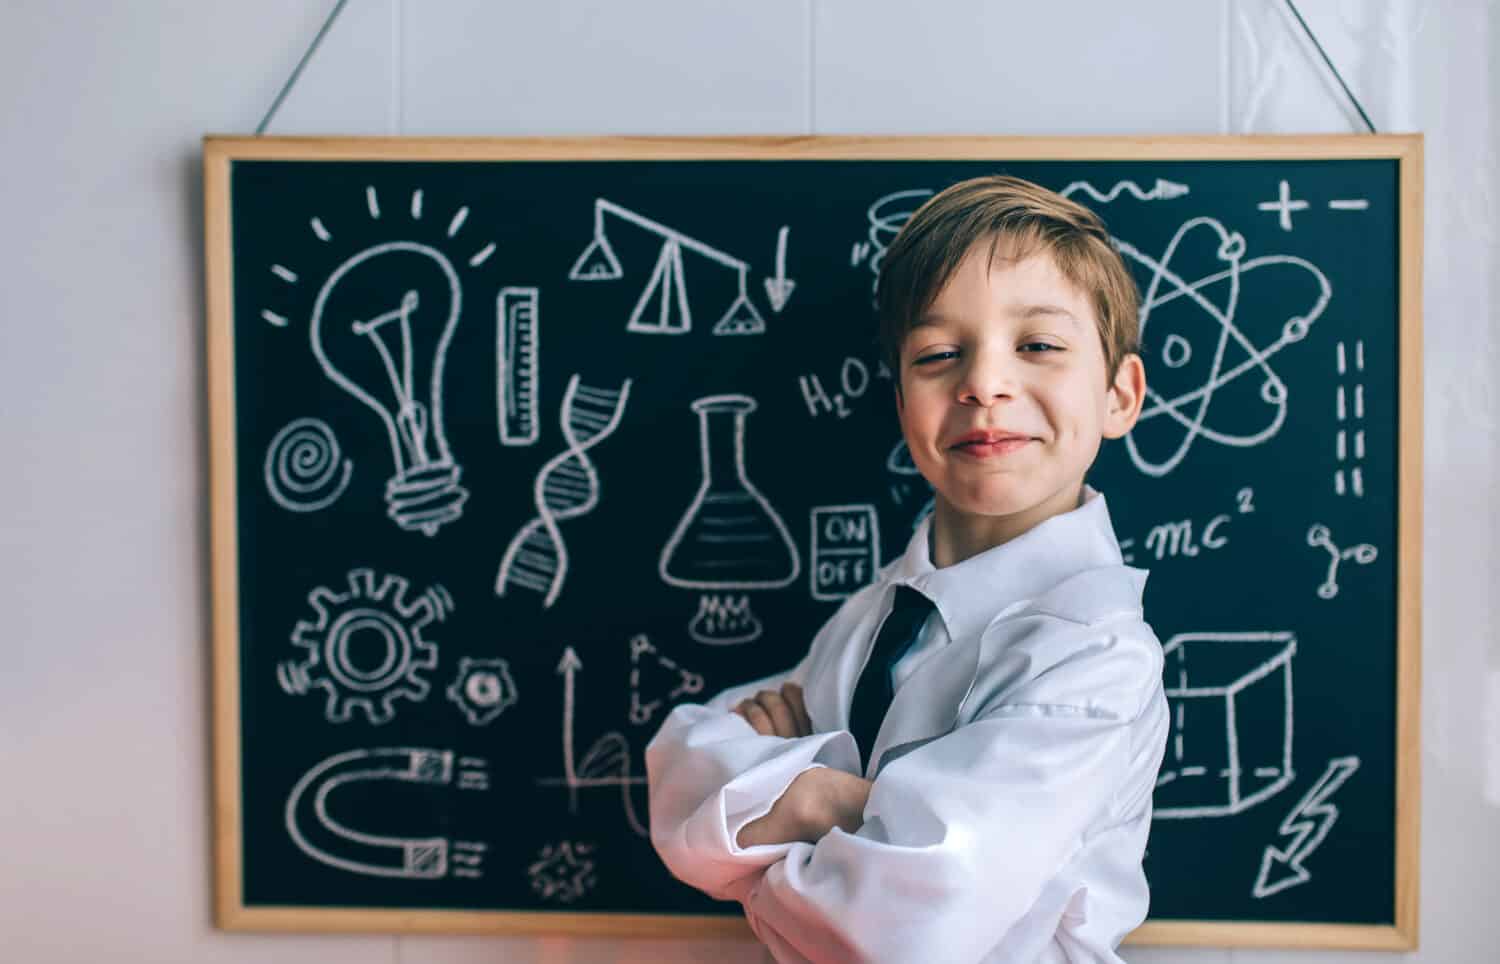 Smiling kid looking at camera in front of blackboard